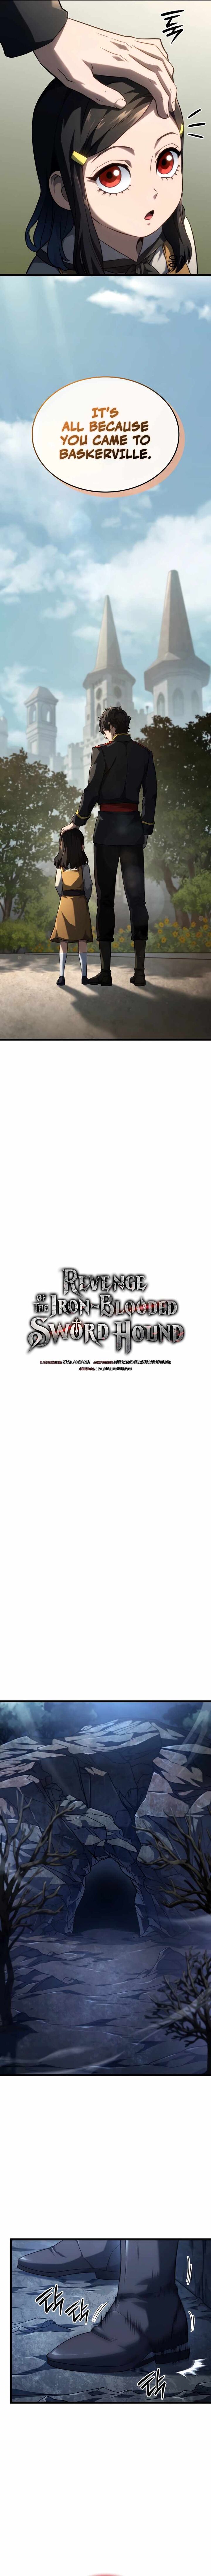 lets read your favorit Read Revenge of the Iron-Blooded Sword Hound Chapter 70 Online Chapter  web comic toon manga online here on meowscan